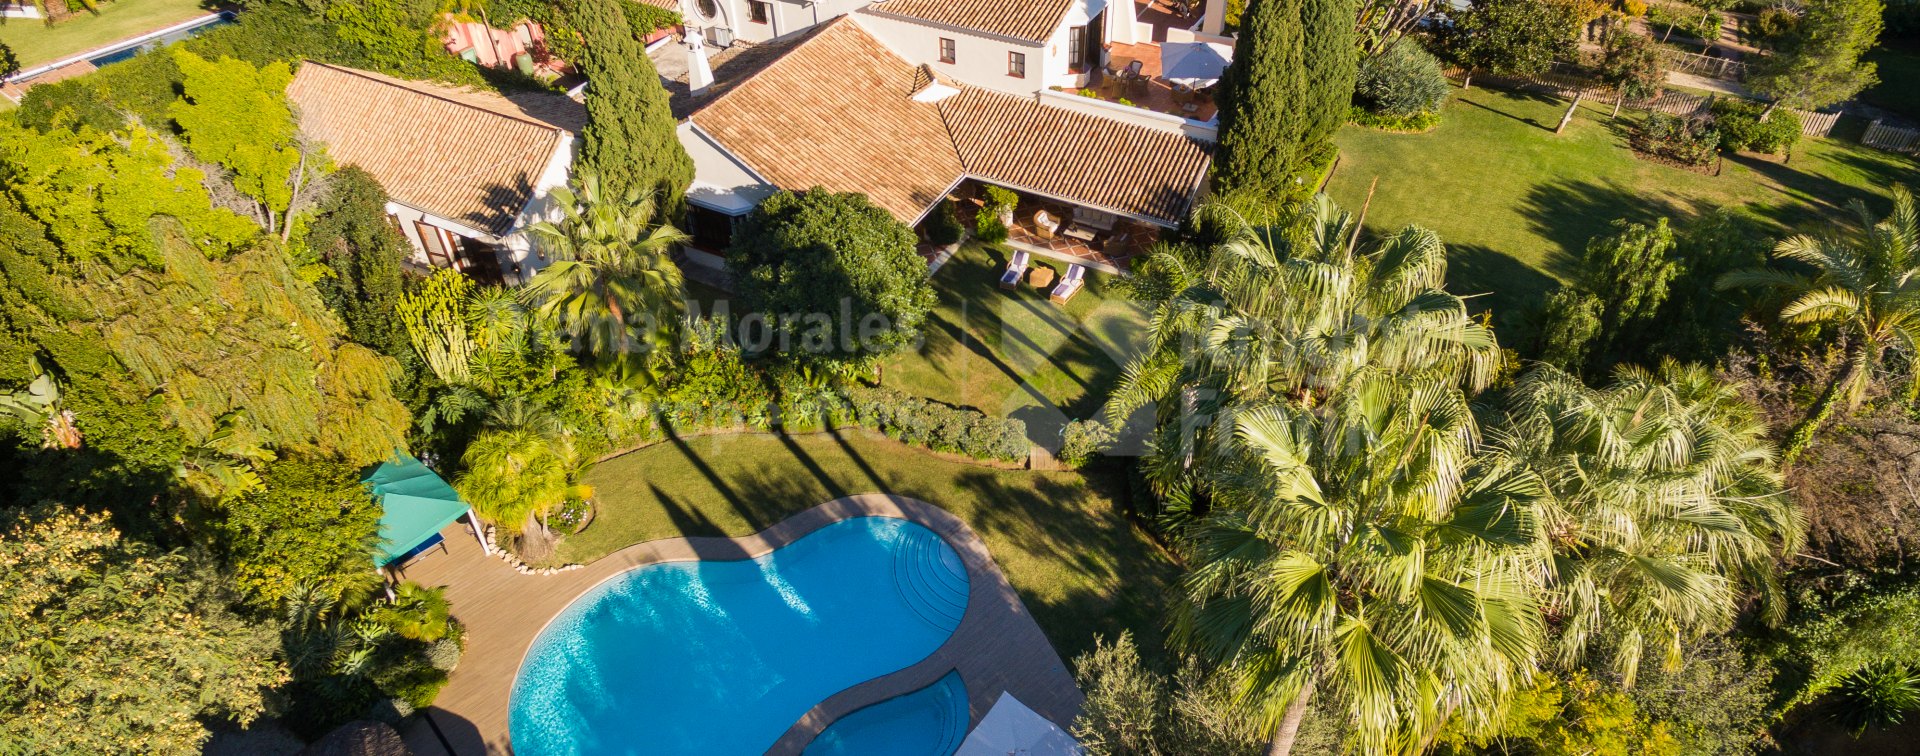 Marbella Hill Club, Ten bedroom villa for rent with andalusian charm